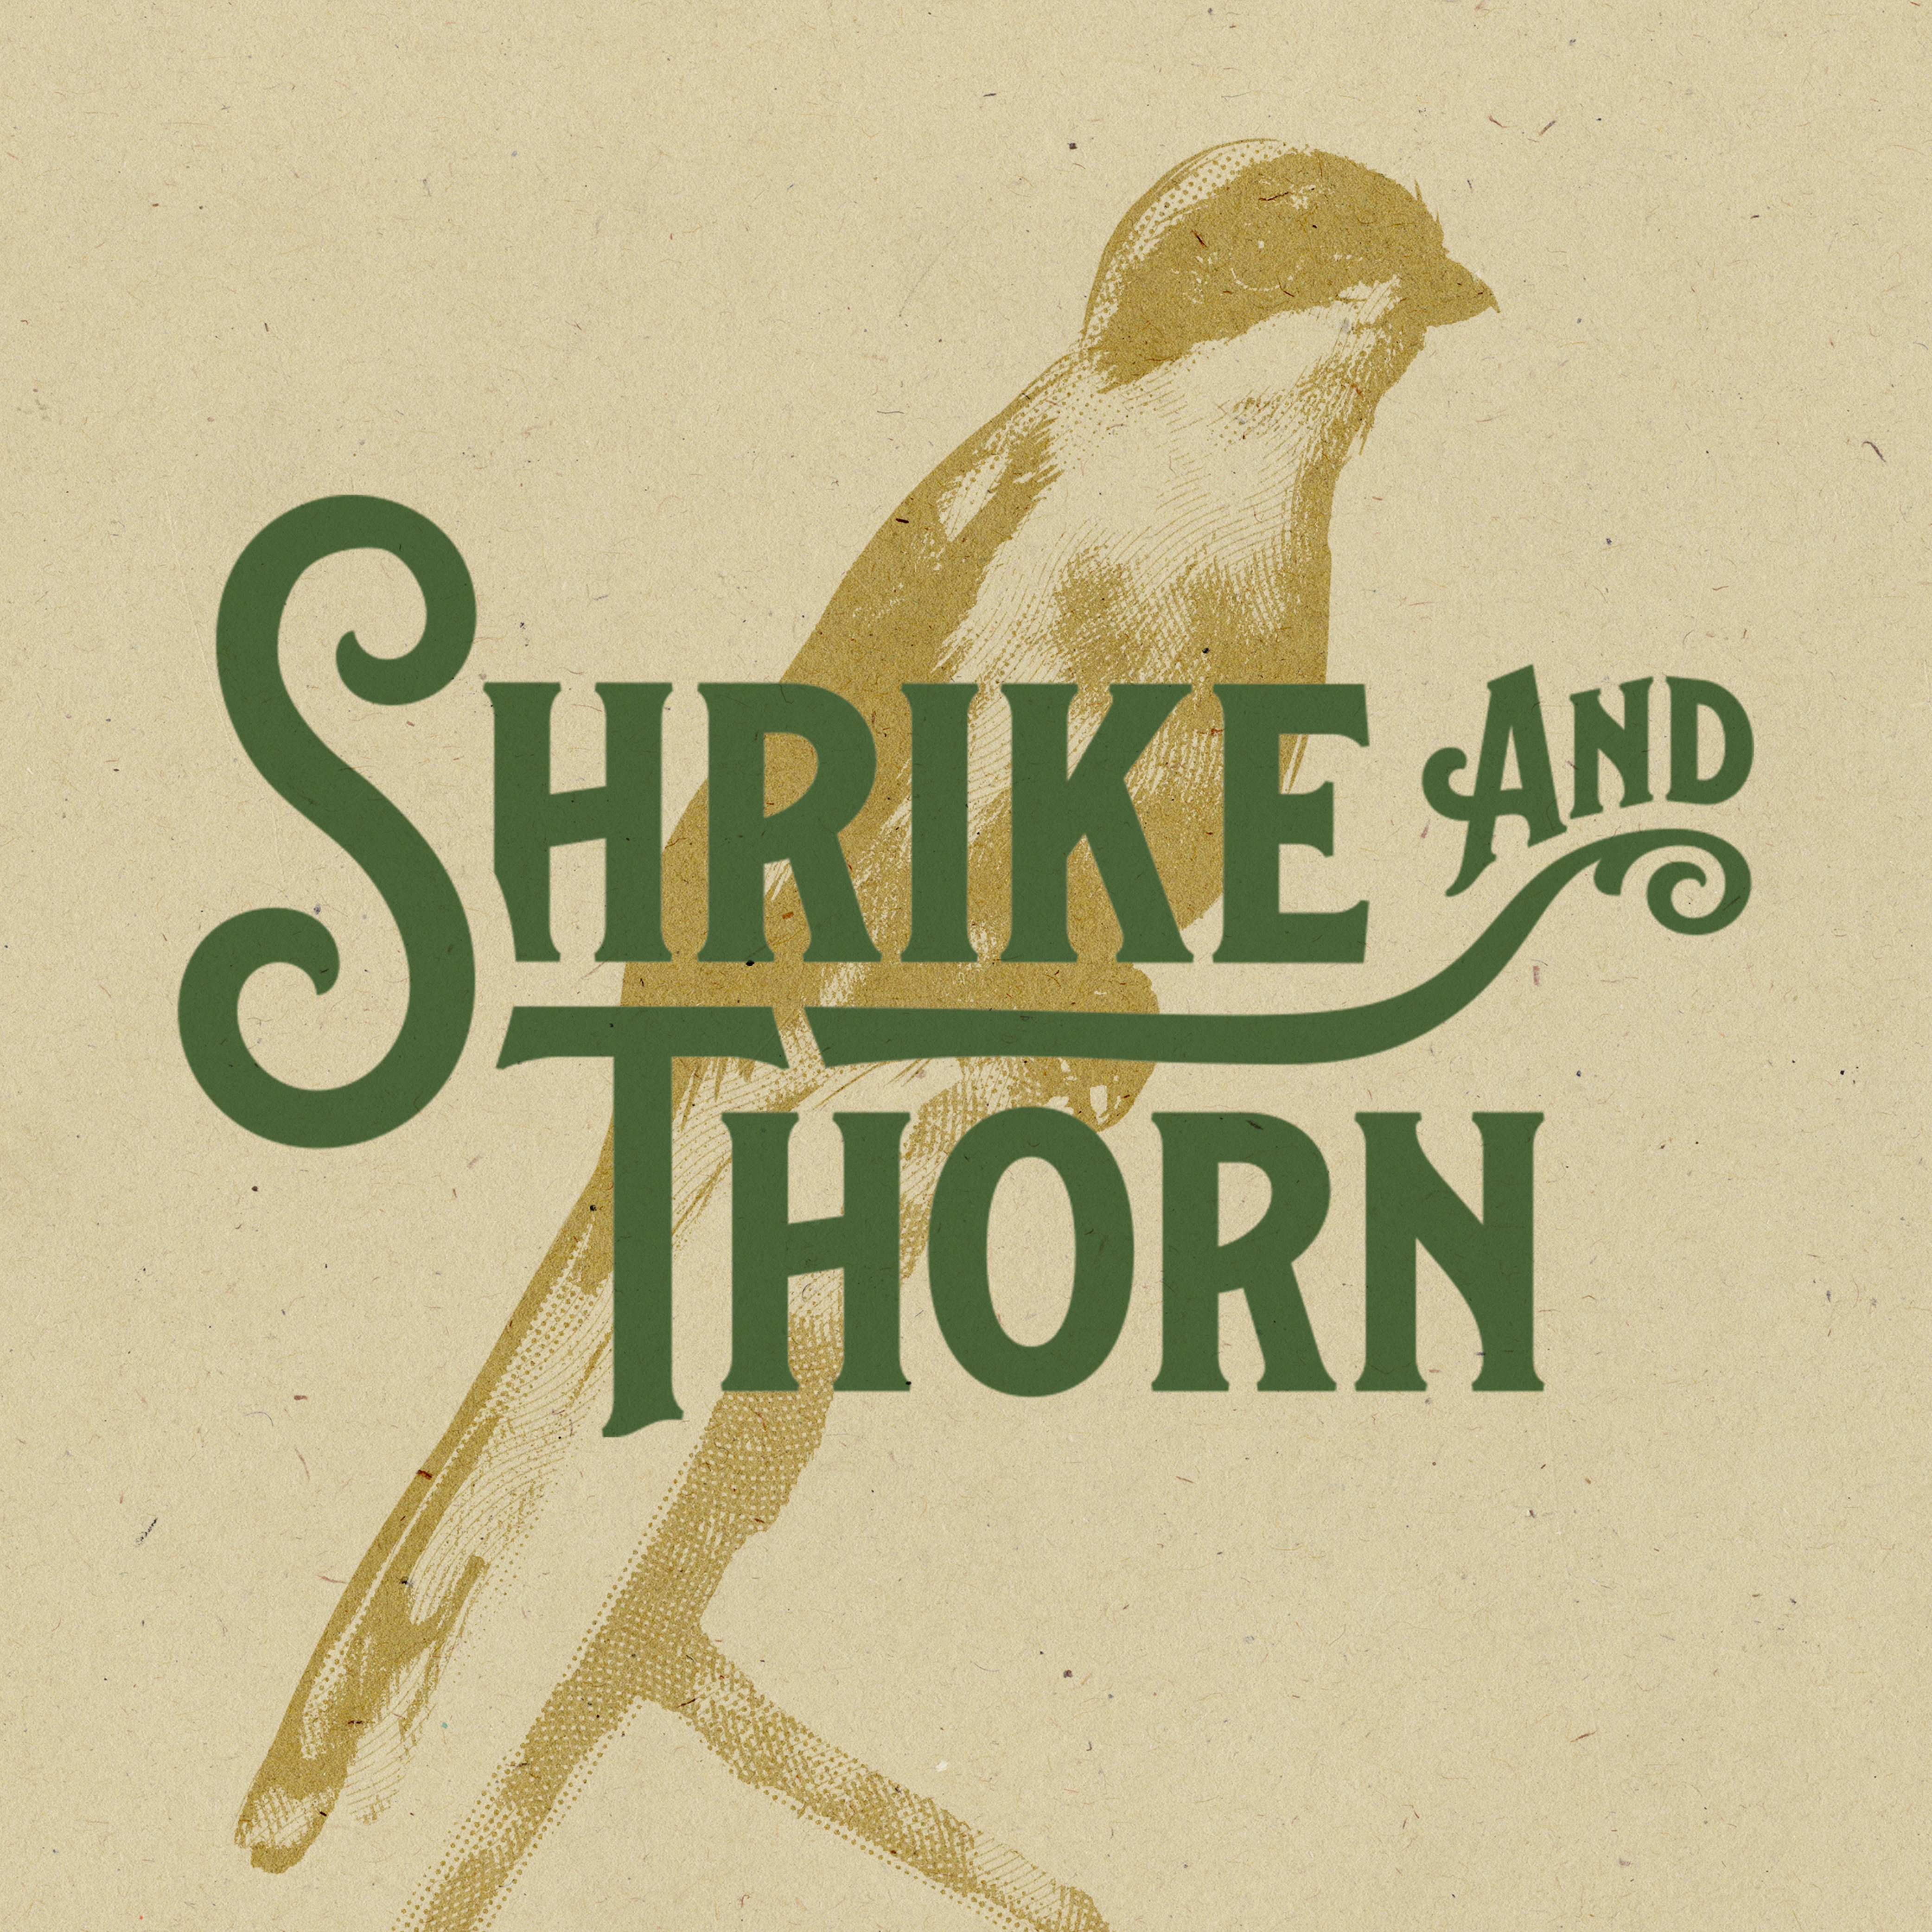 Shrike And Thorn Woodworking And Design - Unlicensed Contractor Logo